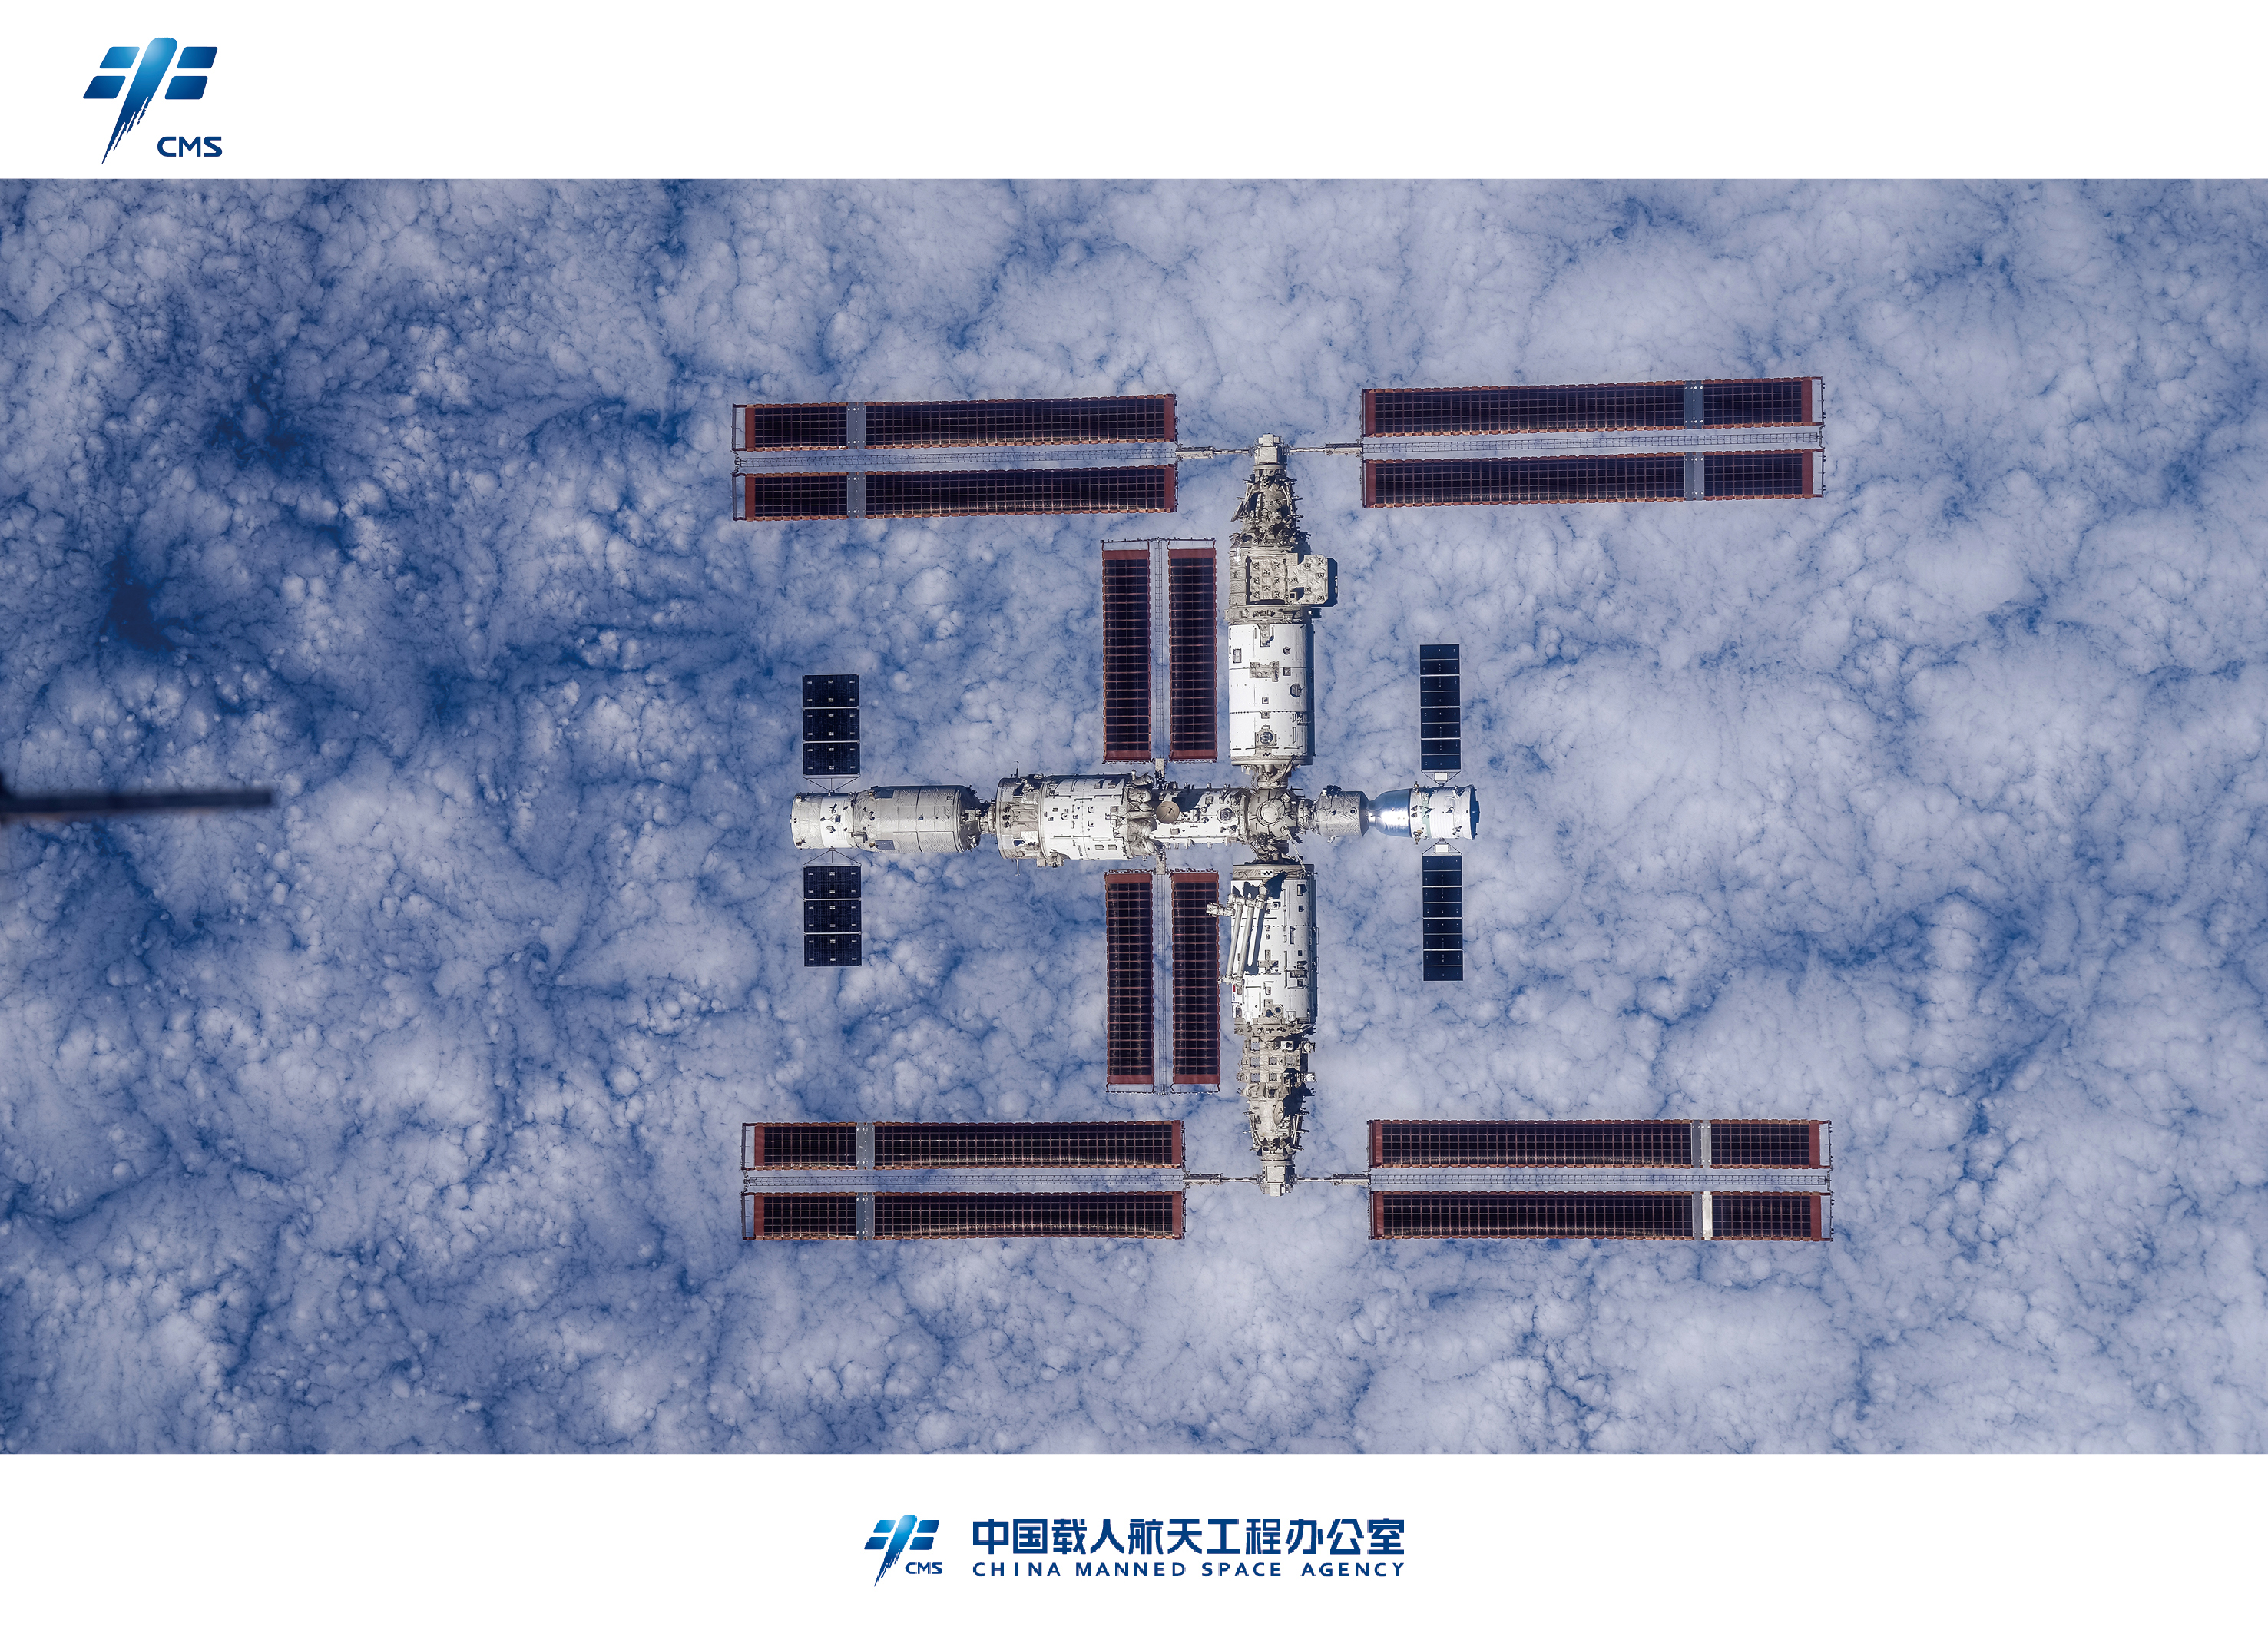 A picture of China Space Station captured by the Shenzhou-16 crew. /China Manned Space Agency